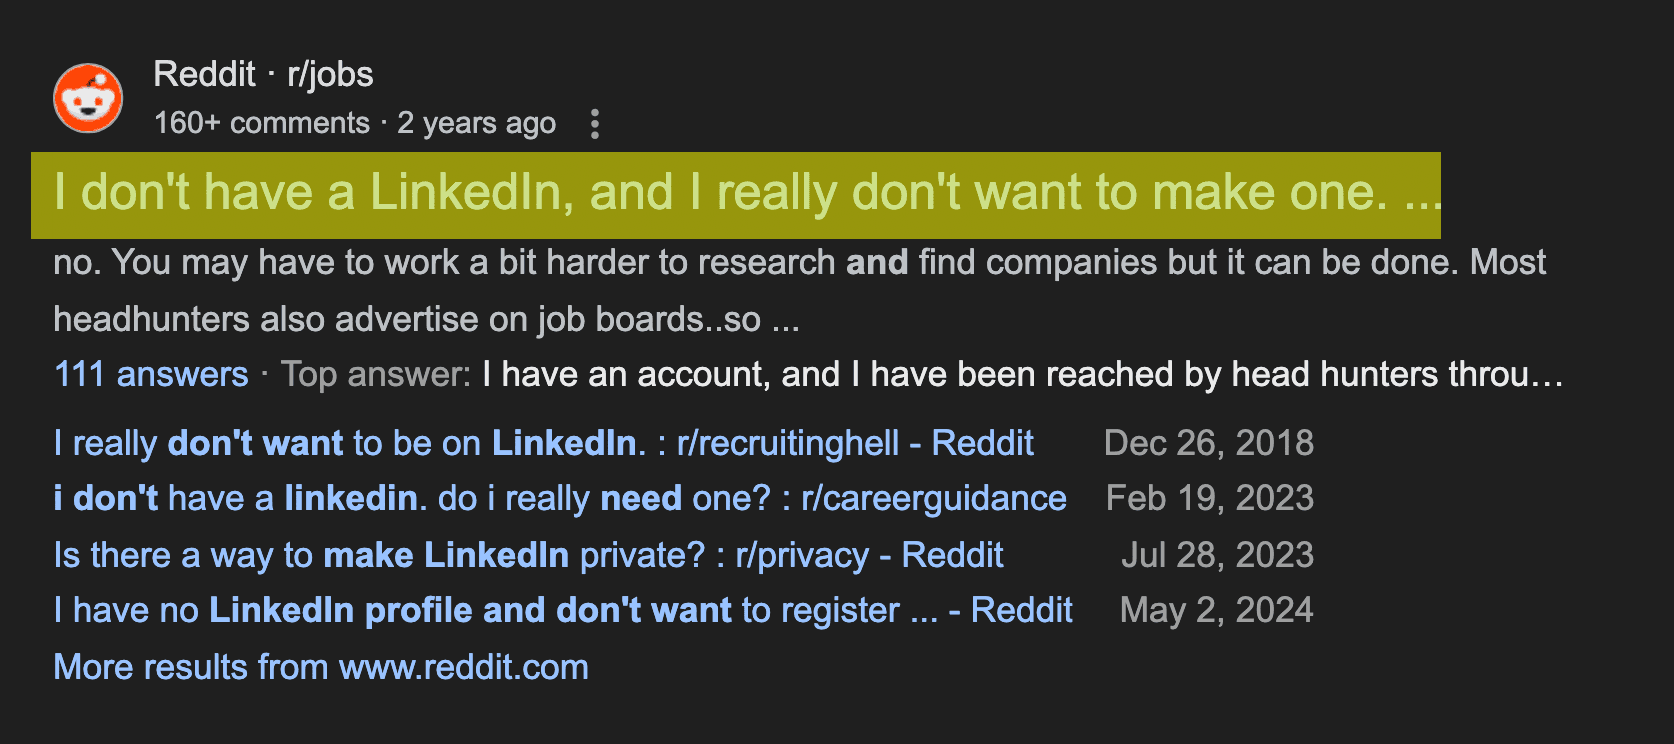 reddit thread i dont have linkedin and i dont want to create account - image3.png